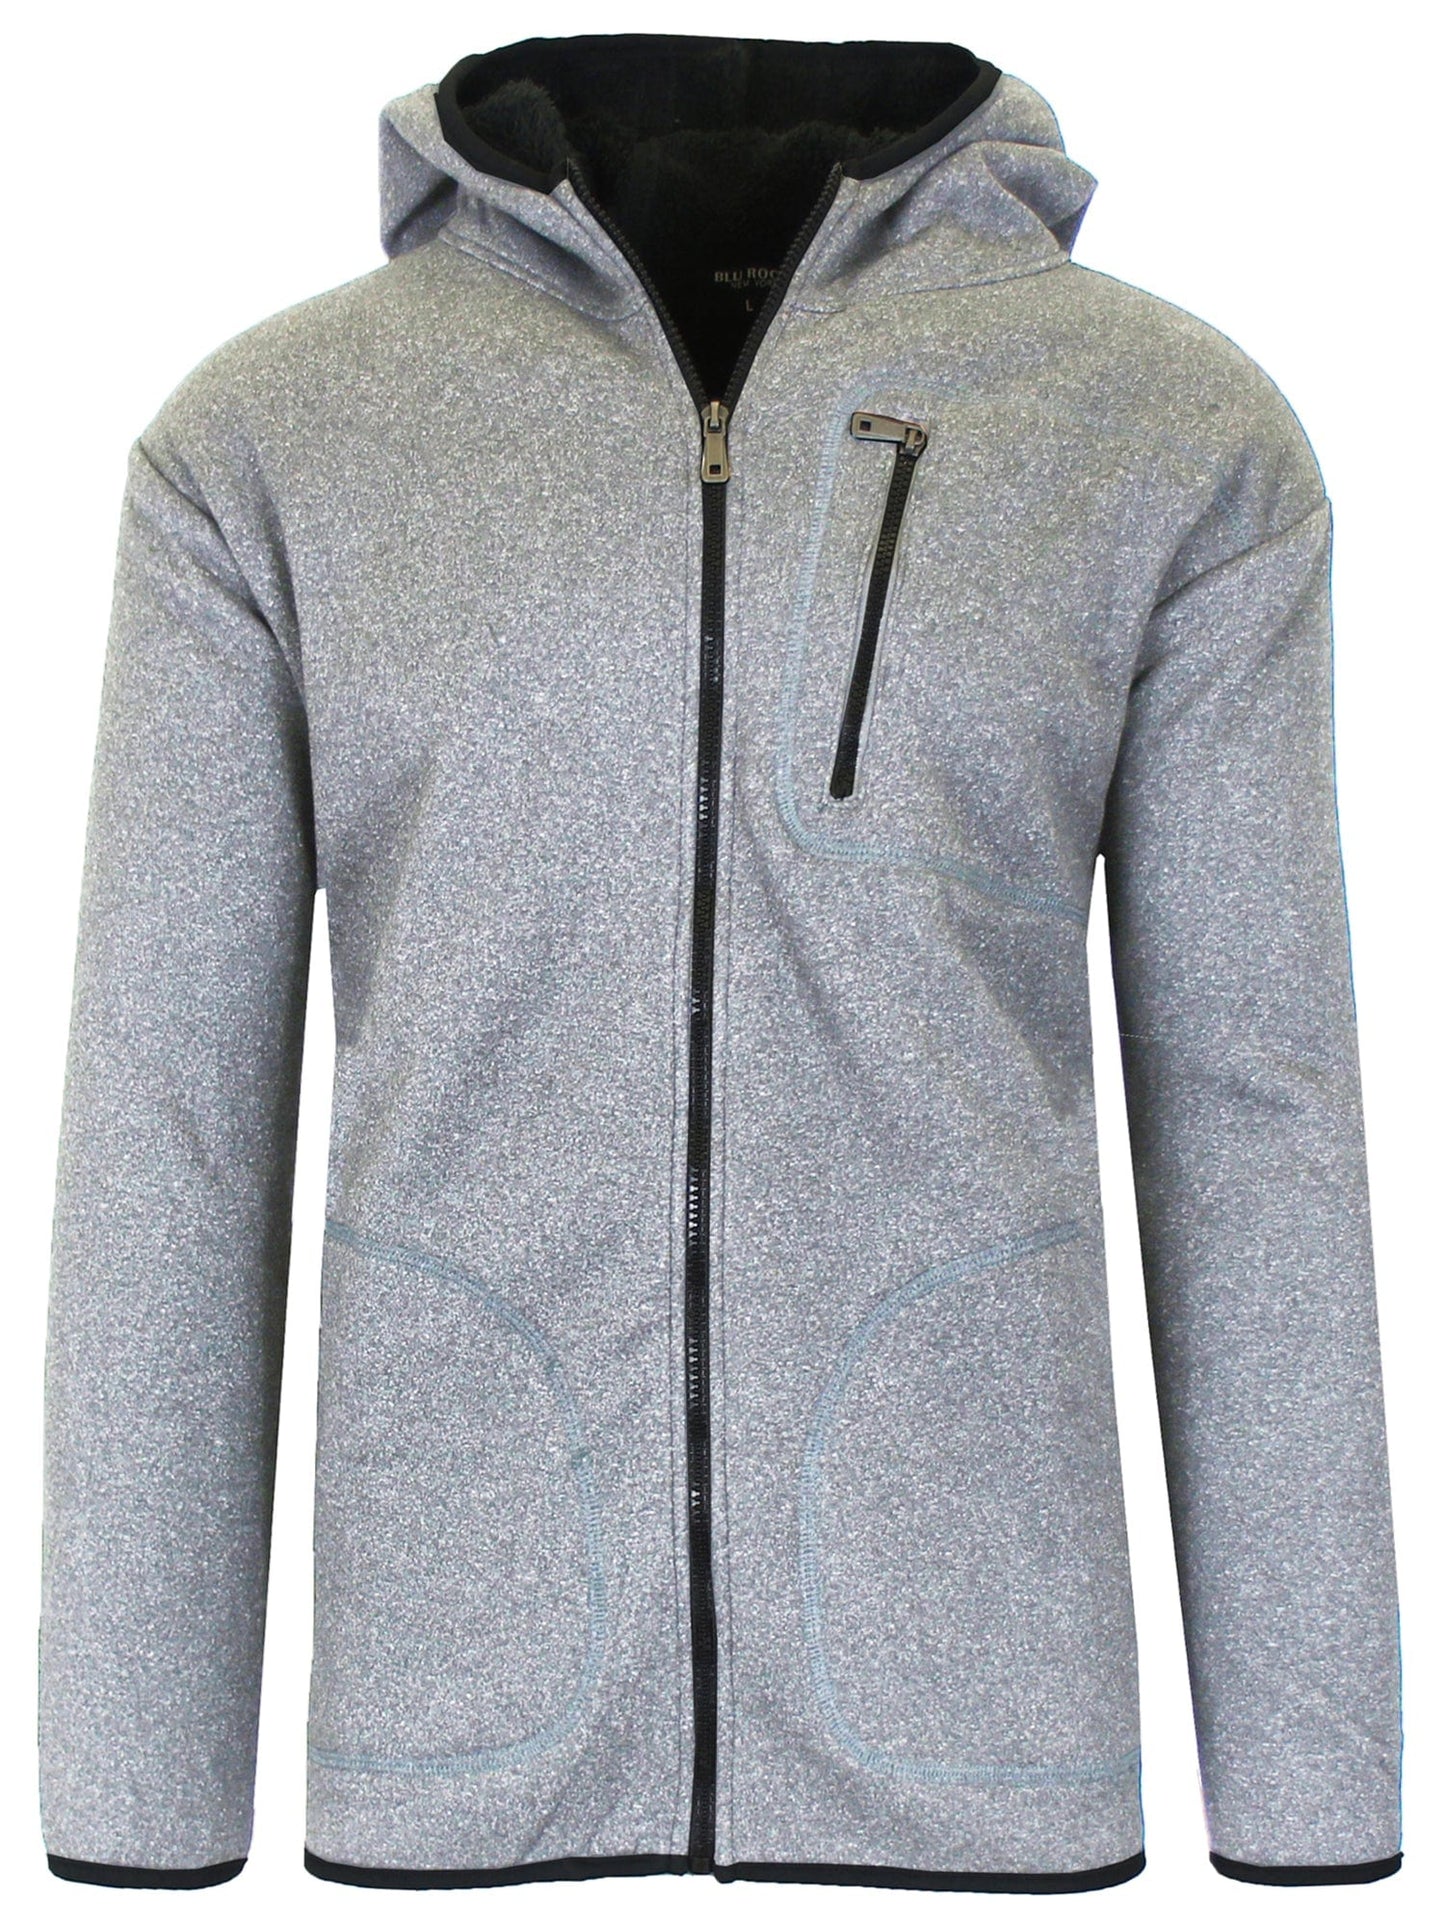 Men's Tech Sherpa Fleece-Lined Zip Hoodie With Chest Pocket - GalaxybyHarvic